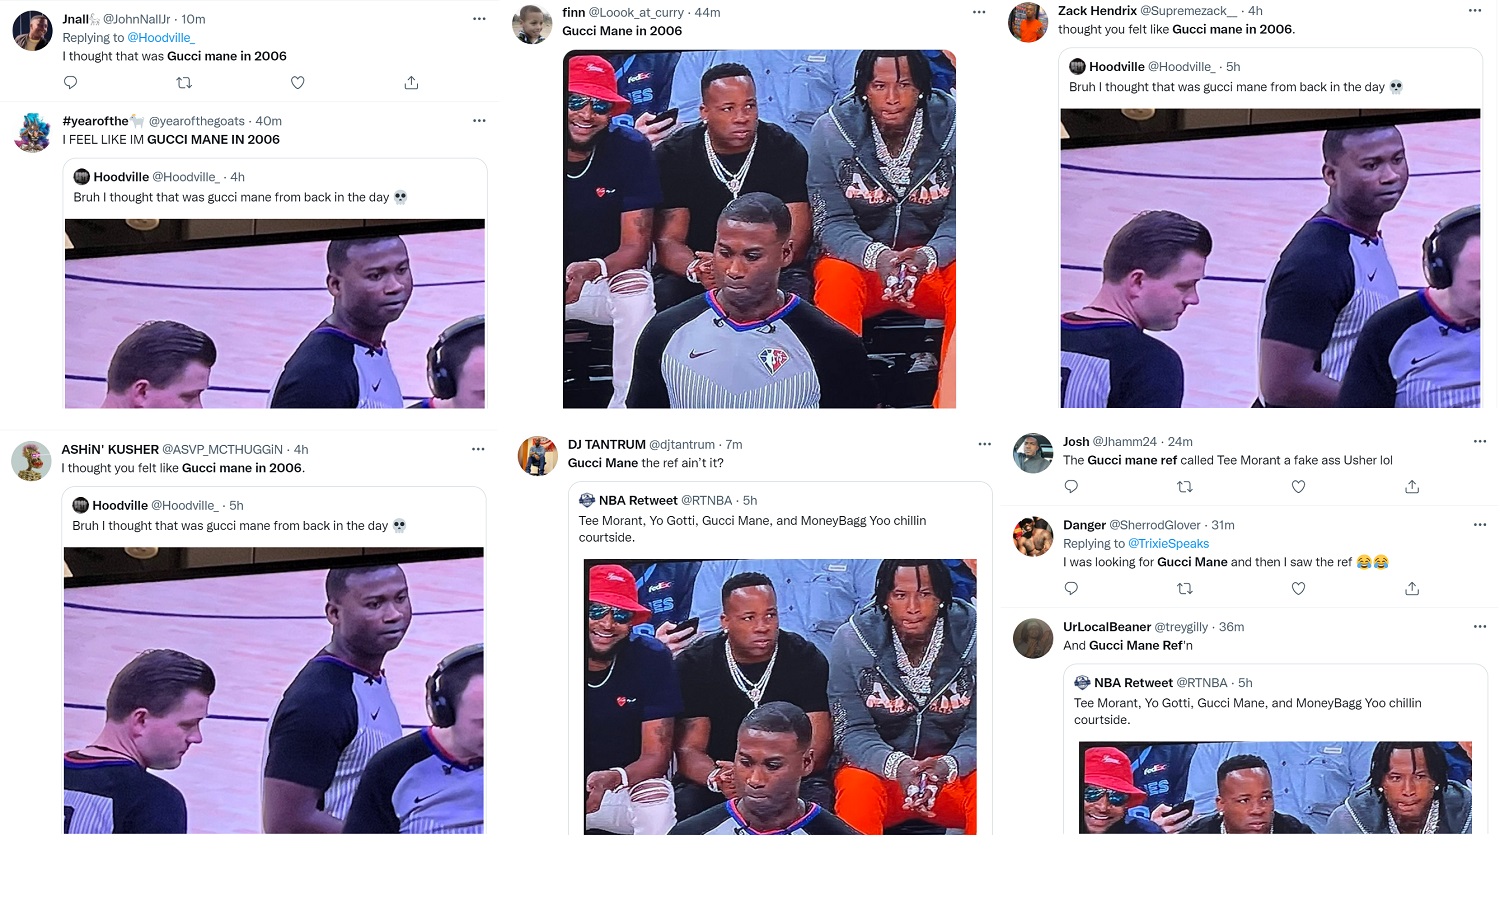 Gucci Mane trends on Twitter due to lookalike NBA ref